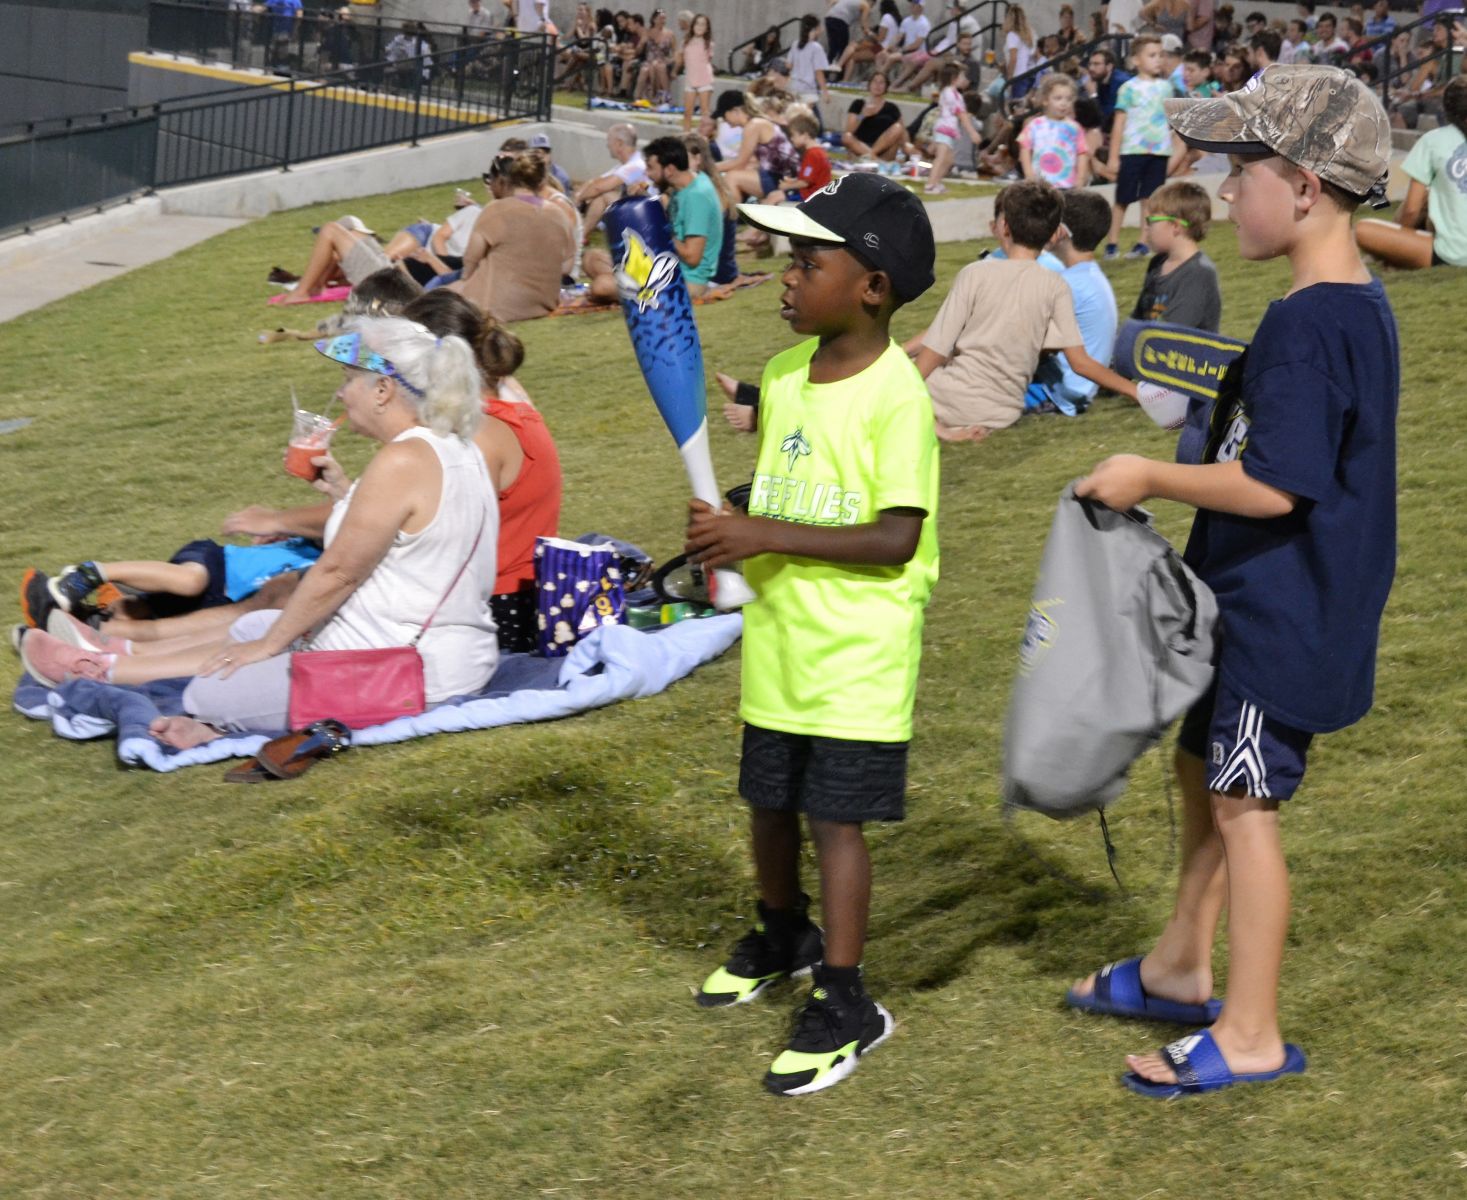 The Columbia Fireflies will open the 2021 season with Segra Park at half capacity. Around 5,000 fans will be allowed at each game, with sections of the ballpark featuring reduced or socially distanced seating. (Photo/Melinda Waldrop)